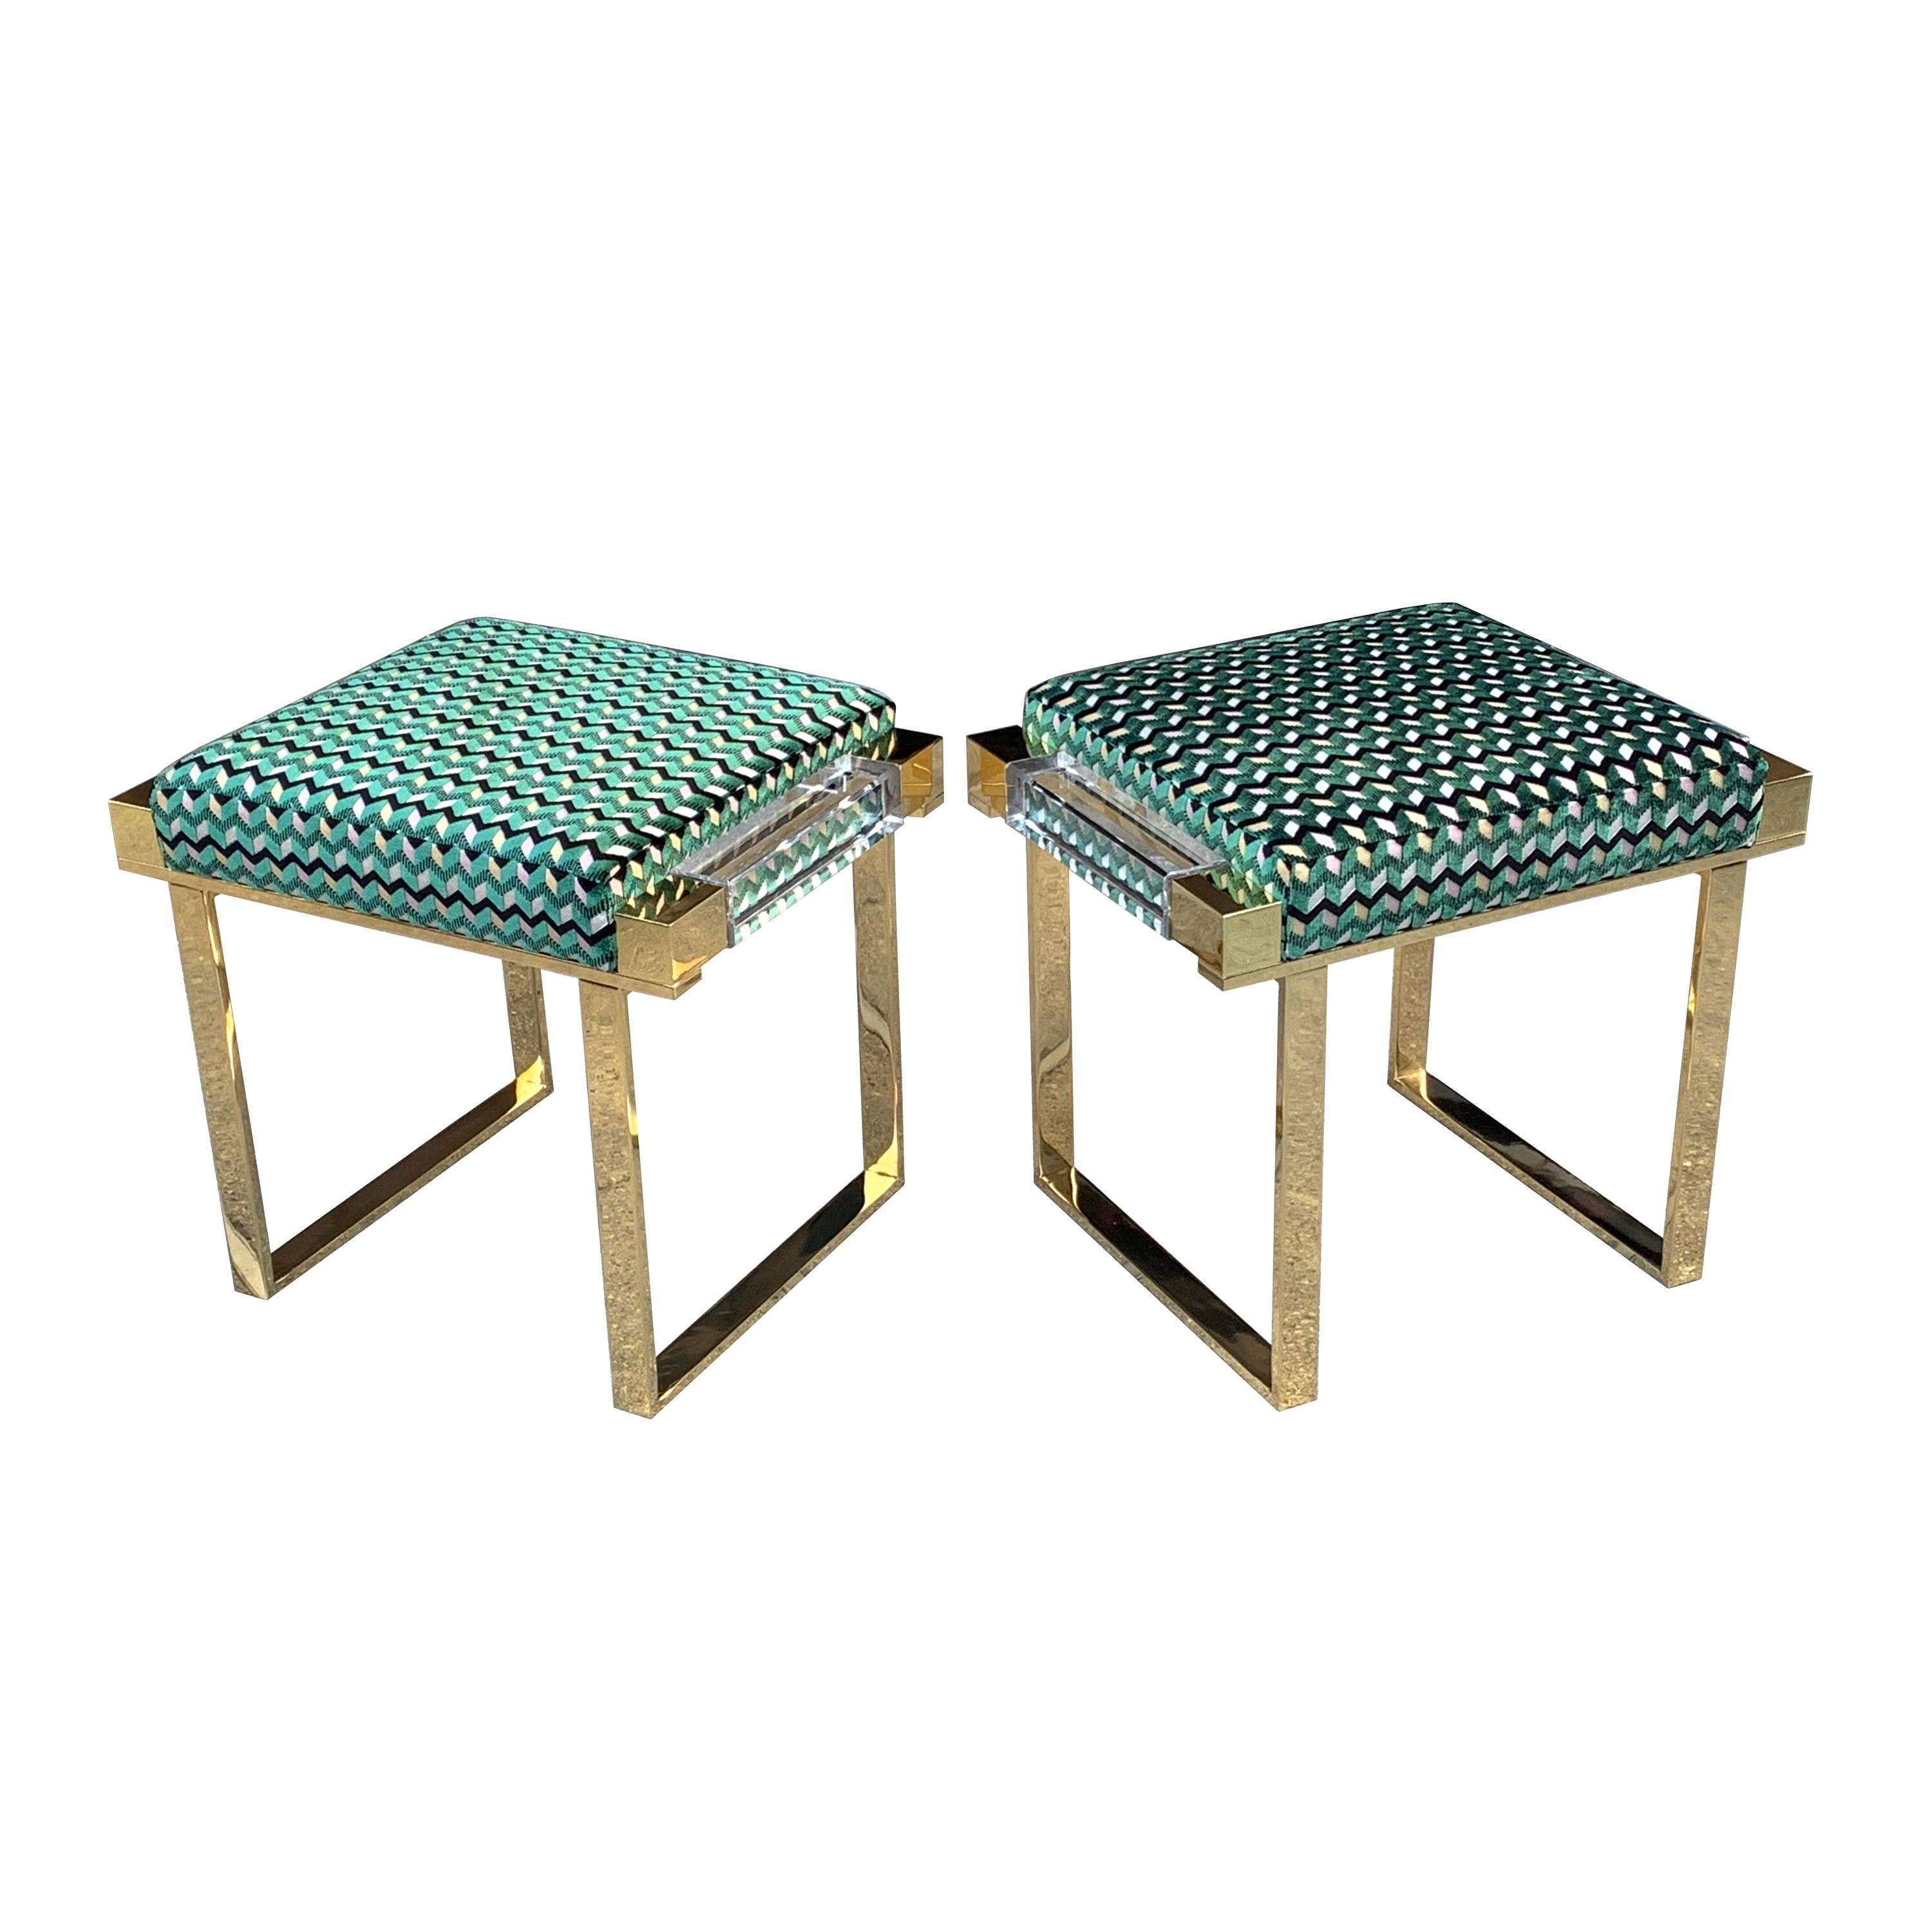 Custom Lucite and Solid Brass "Box" Benches by Charles Hollis Jones